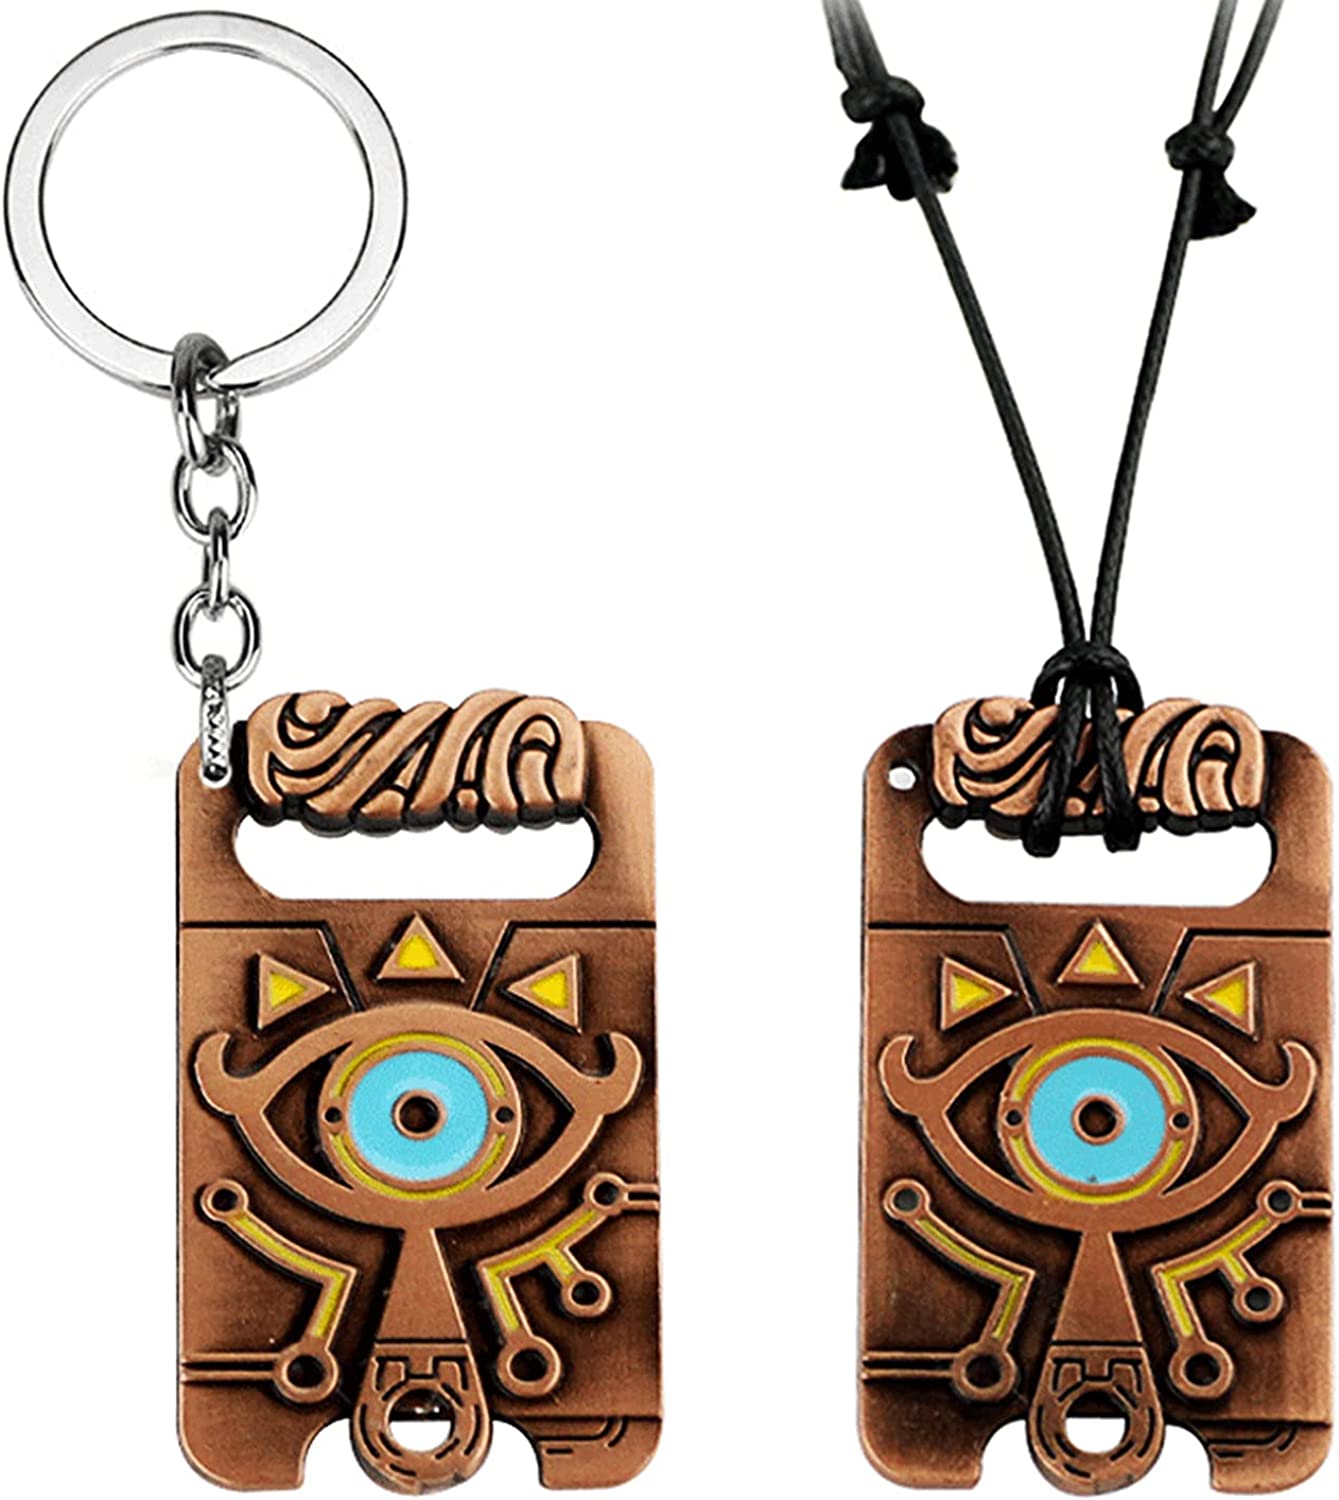 Winssigma The Legend of Zelda Inspired Necklace Keychain Jewelry Set Cosplay for Fans